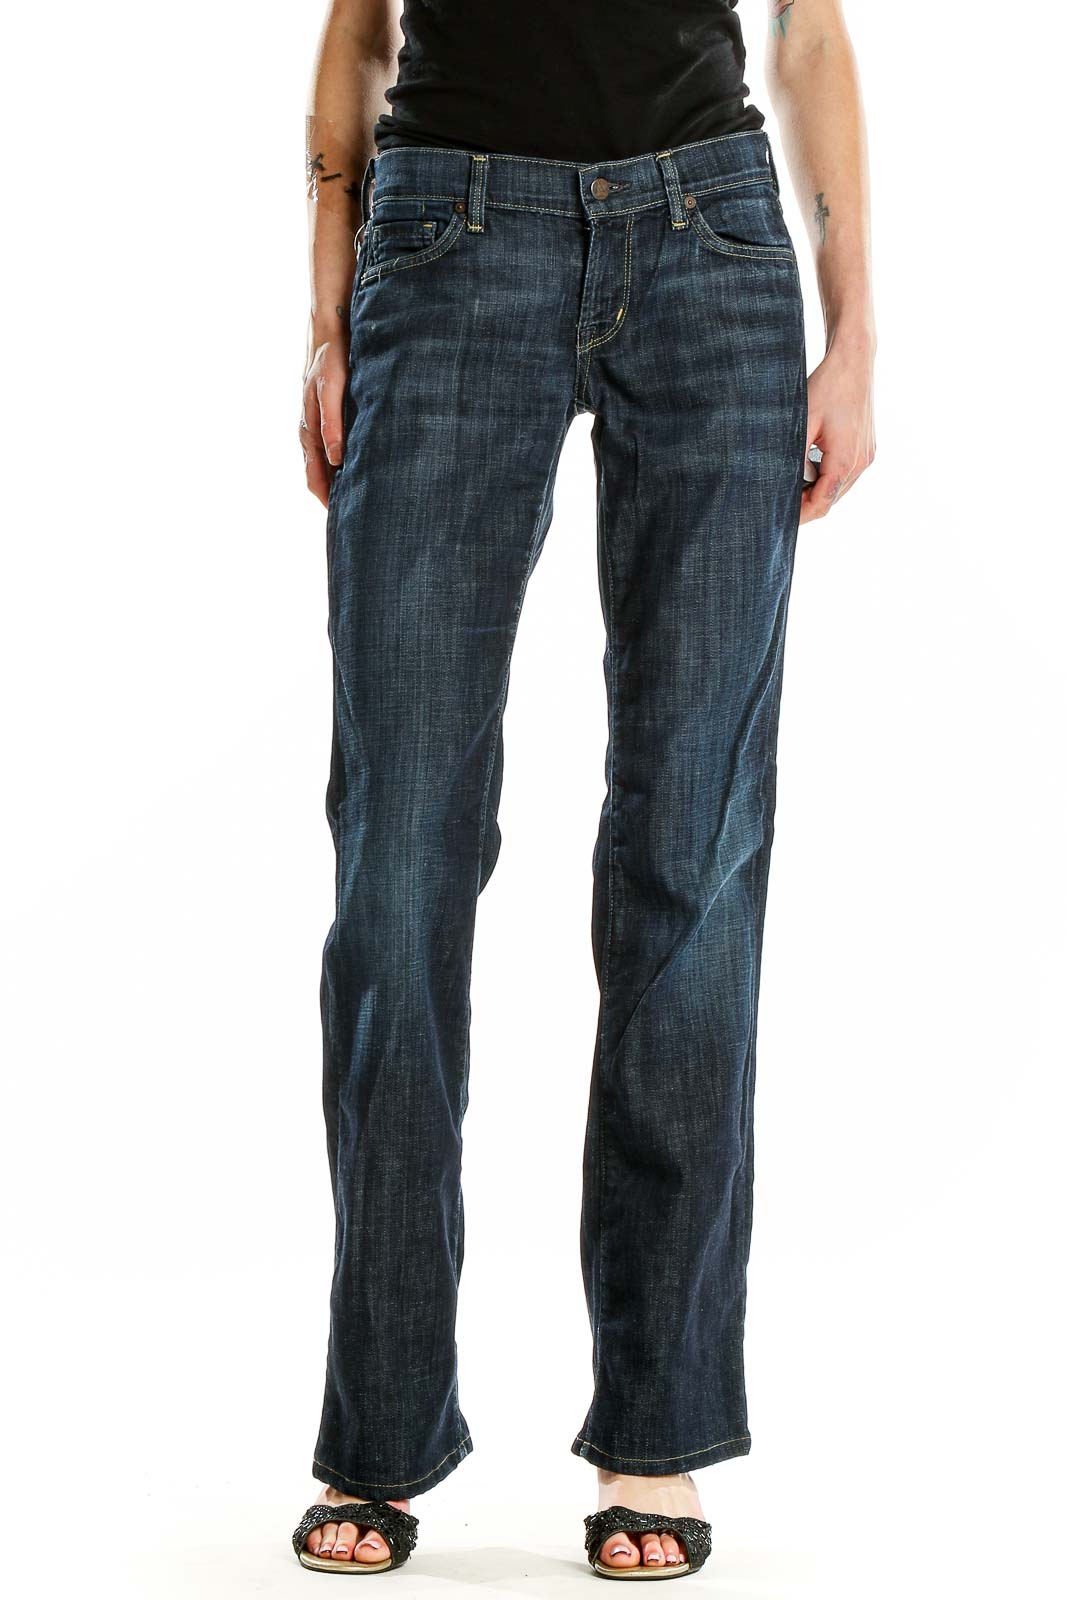 Blue Dark Rinse Jeans Front